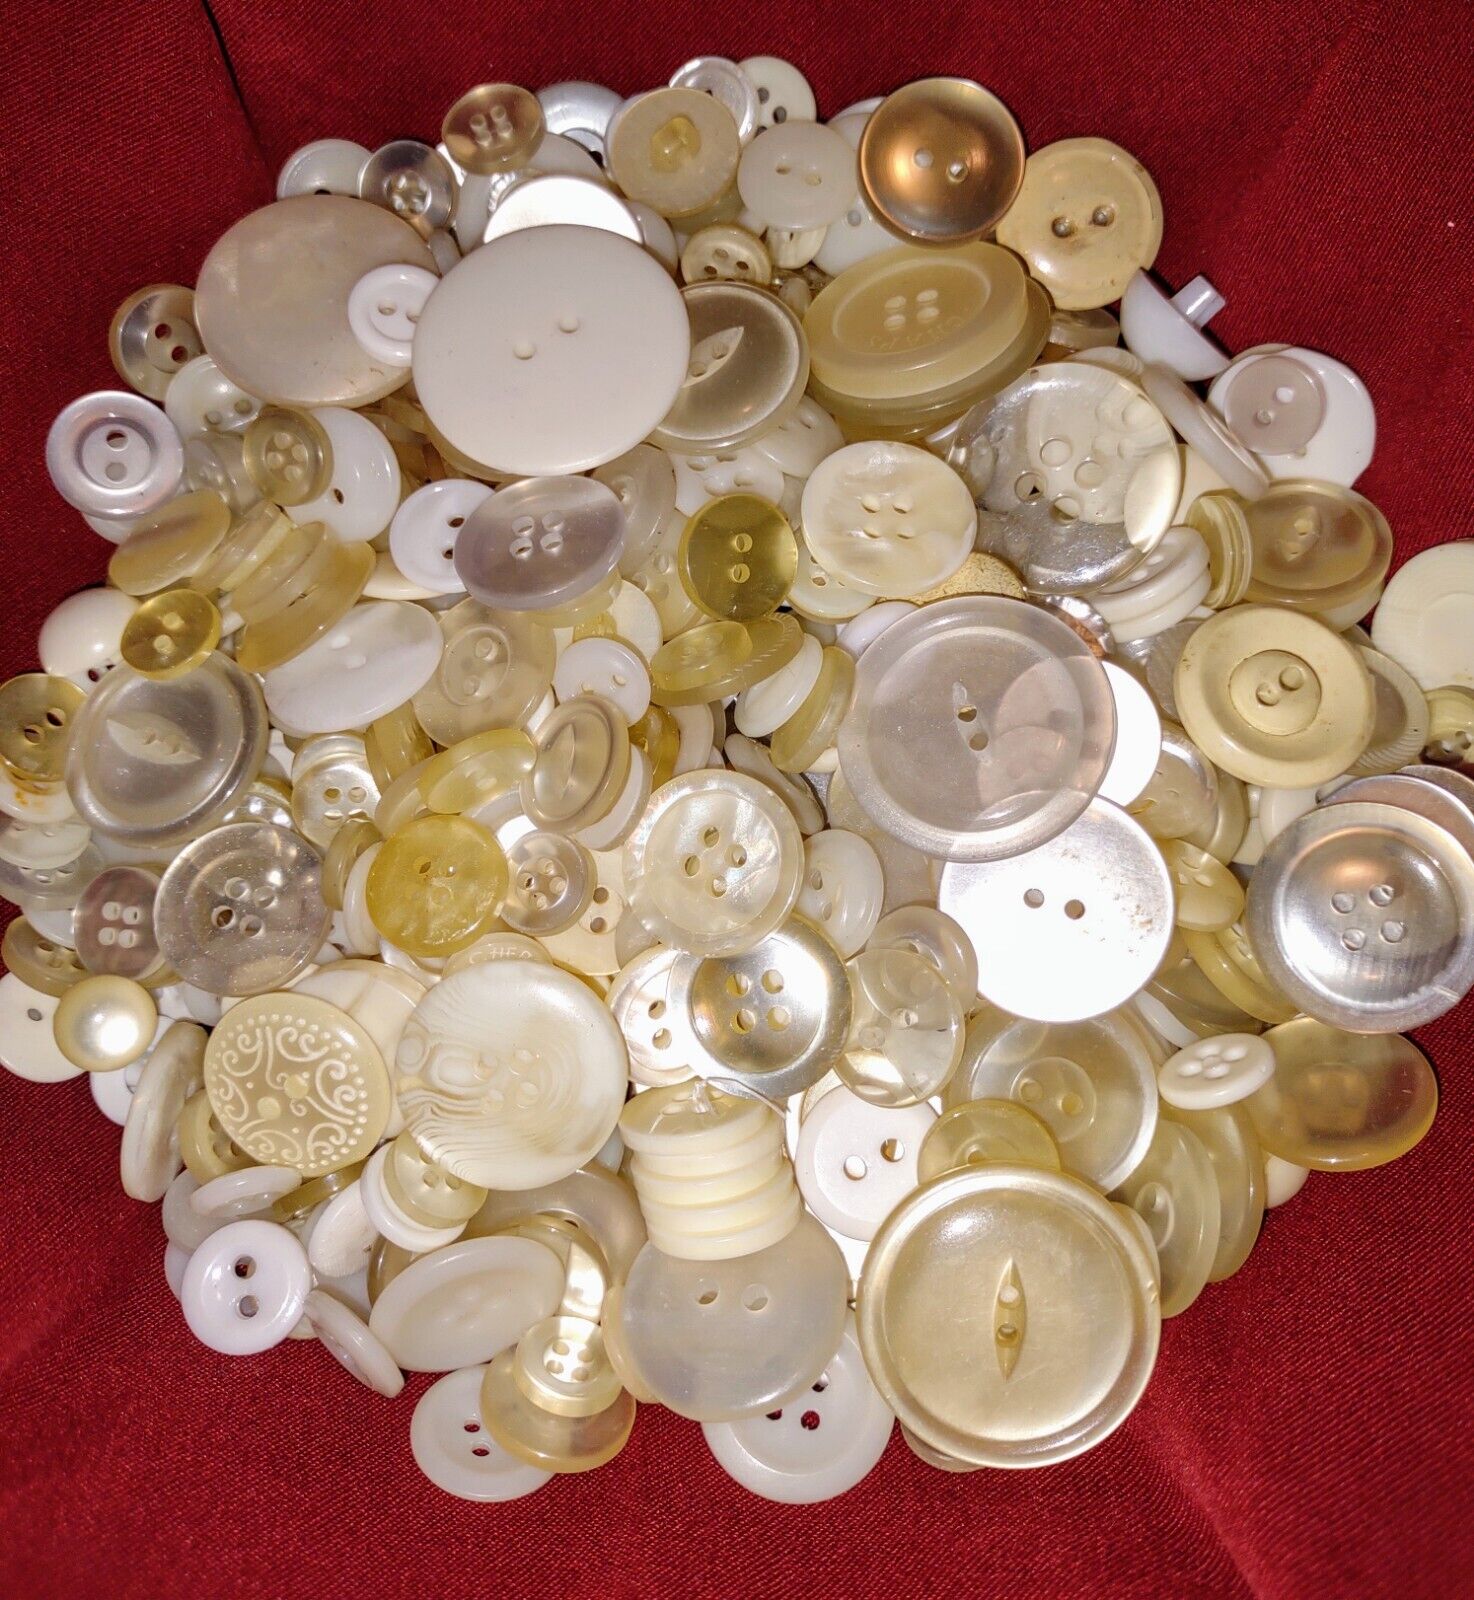 Bulk Lot 500+ Assorted White/Clear Buttons for Crafts, Variety Of Sizes/ Types